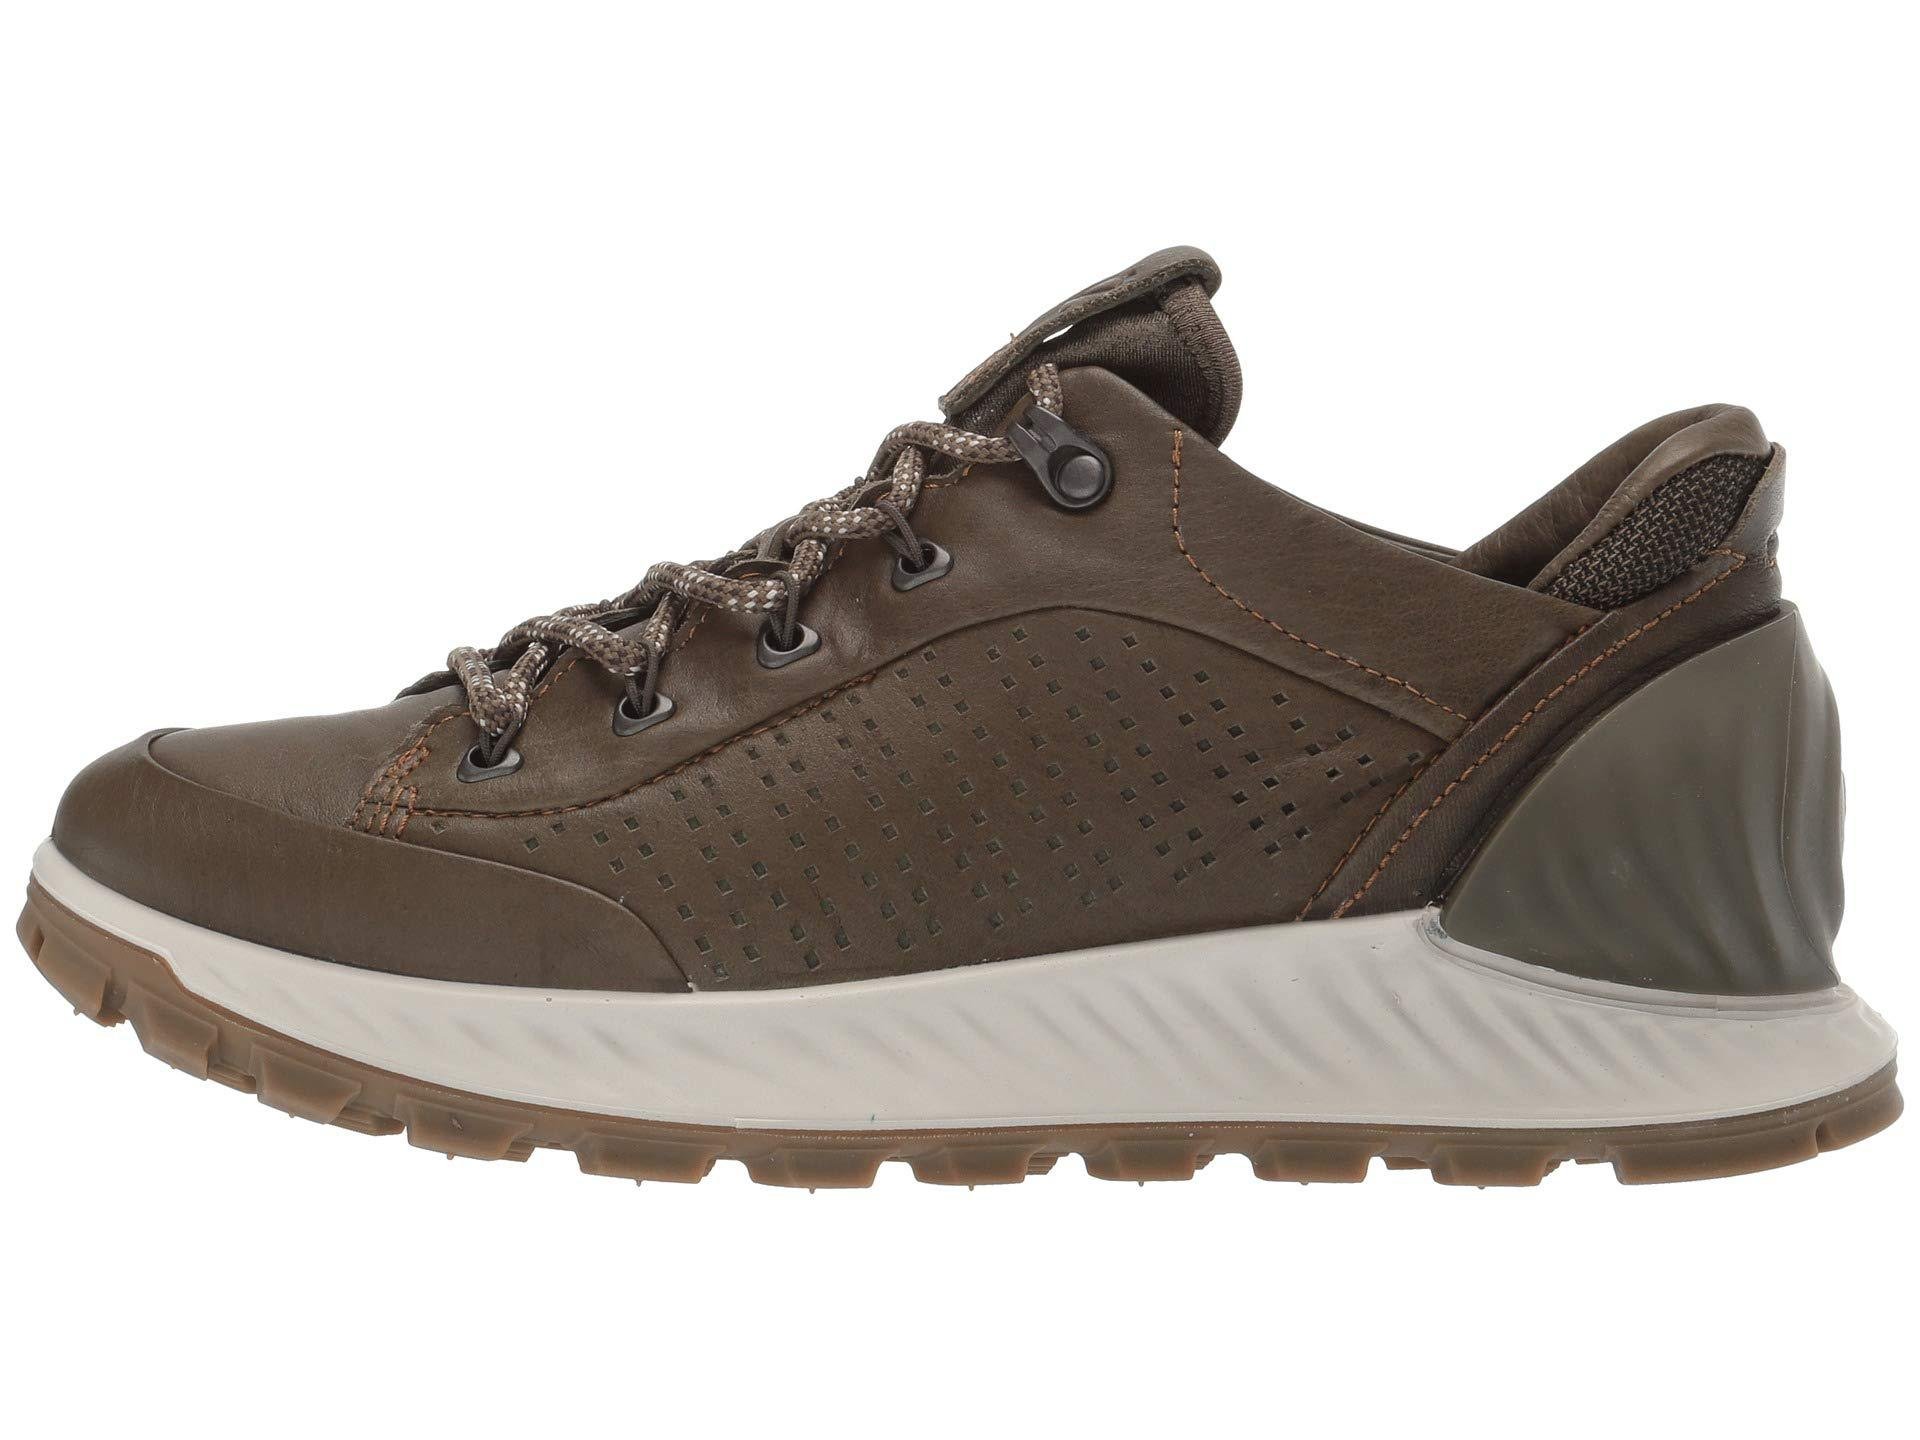 Ecco Rubber Exostrike Low Hiking Shoe in Deep Forest (Brown) for Men - Save  49% - Lyst